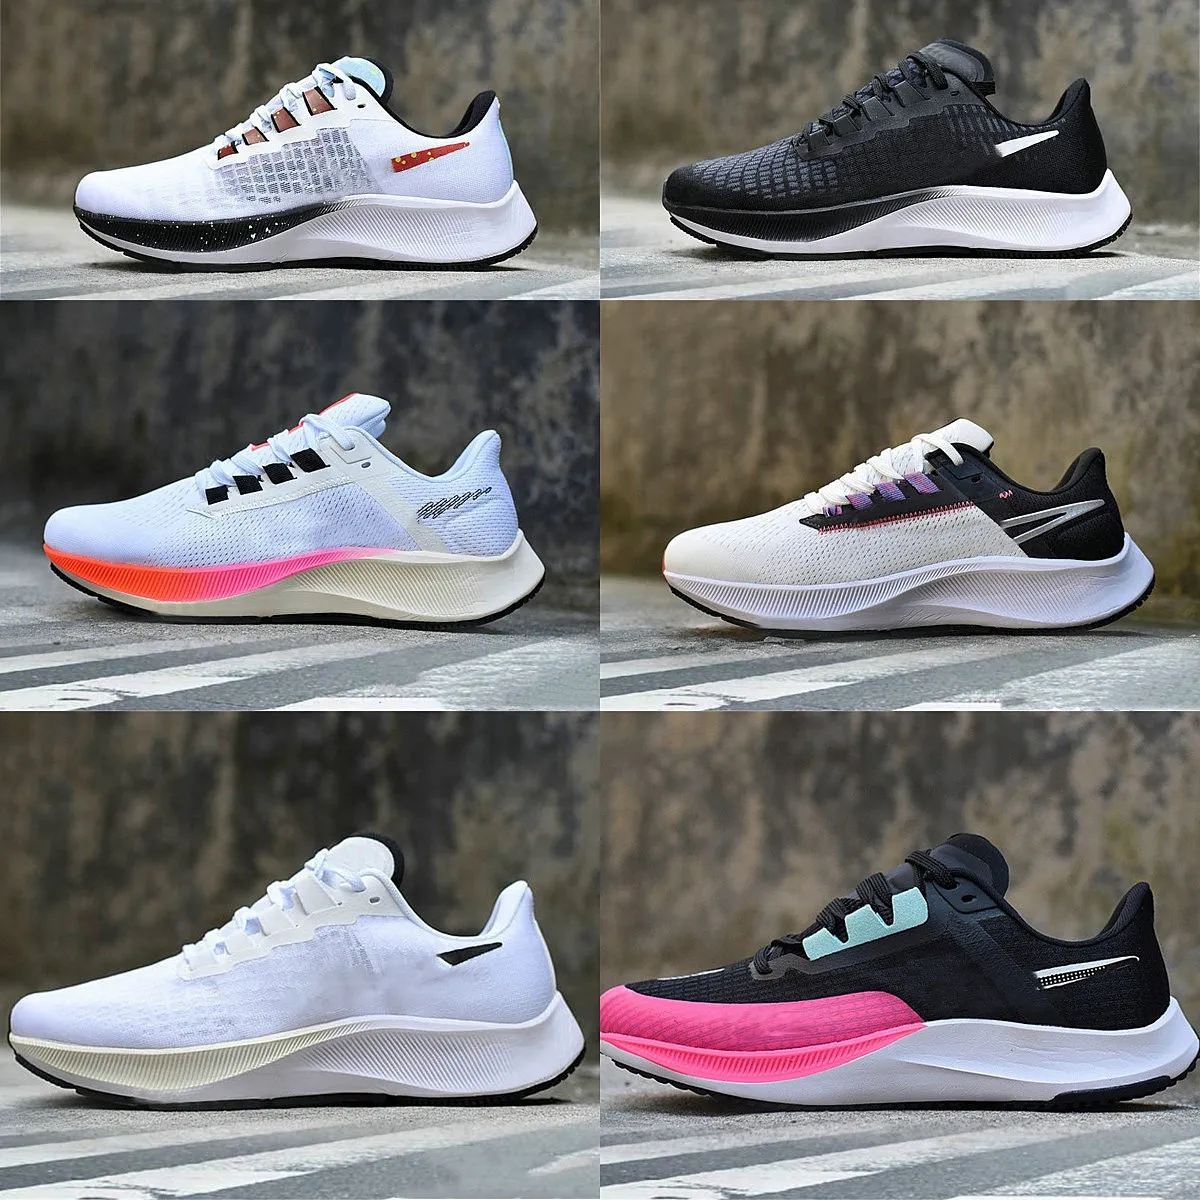 Designers Pegasus Soyez vrai 37 39 35 Turbo Casual Sports Chaussures Zoom Flyease 38 Triple White Midnight Black Navy Chlore Ribbon Multi Anthracite Trainer Sneakers Y58